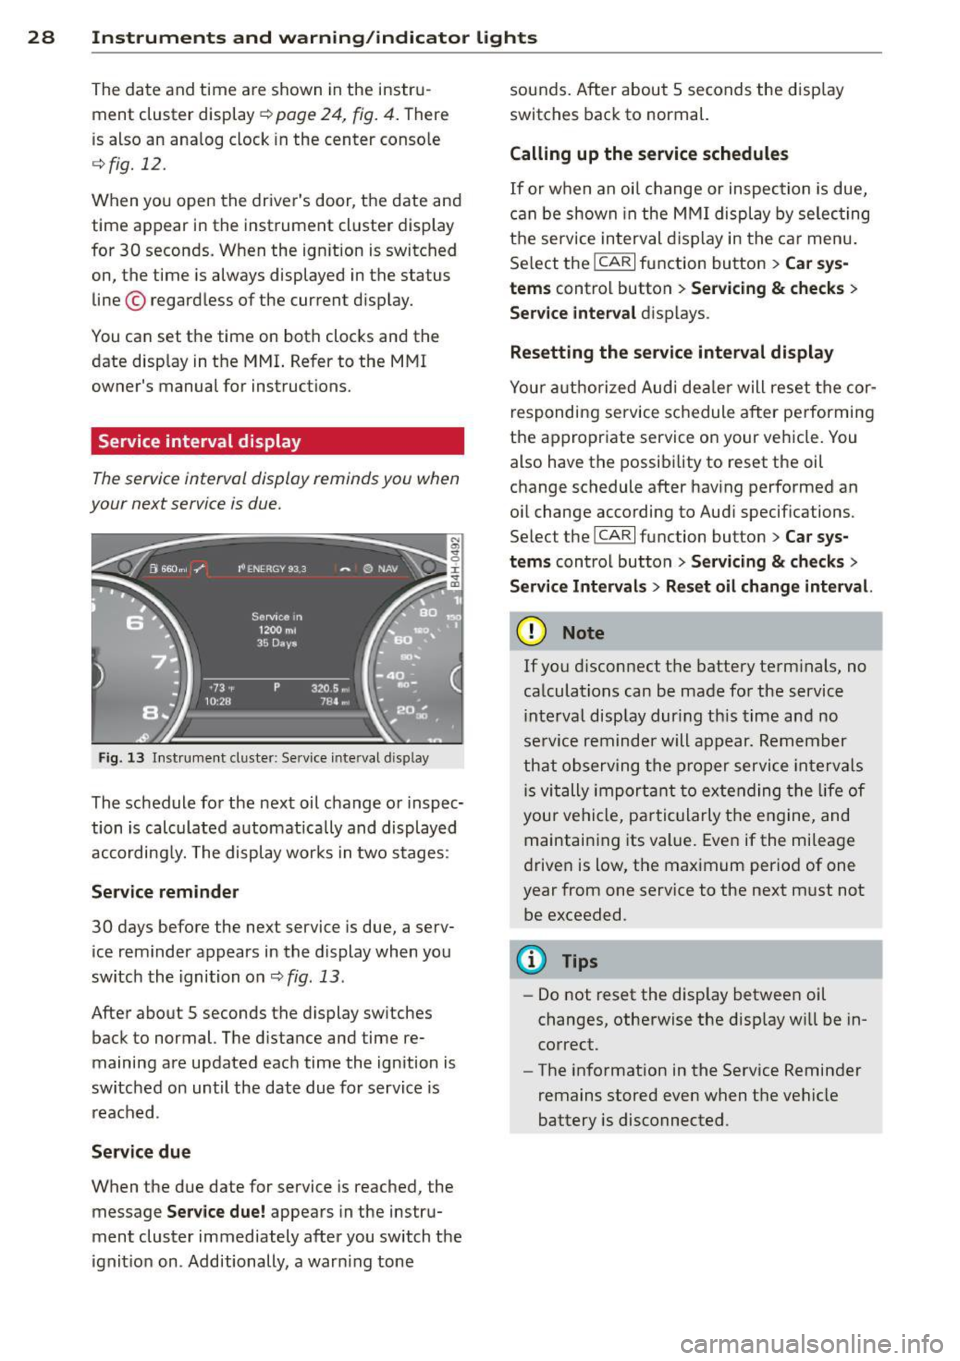 AUDI A8 2014  Owners Manual 28  Instruments  and  warning/indicator  lights 
The date  and time  are shown  in the  instru­
ment  cluster  d isplay 
c:;, page  24,  fig.  4.  There 
is  also an ana log clock  in the  center  co